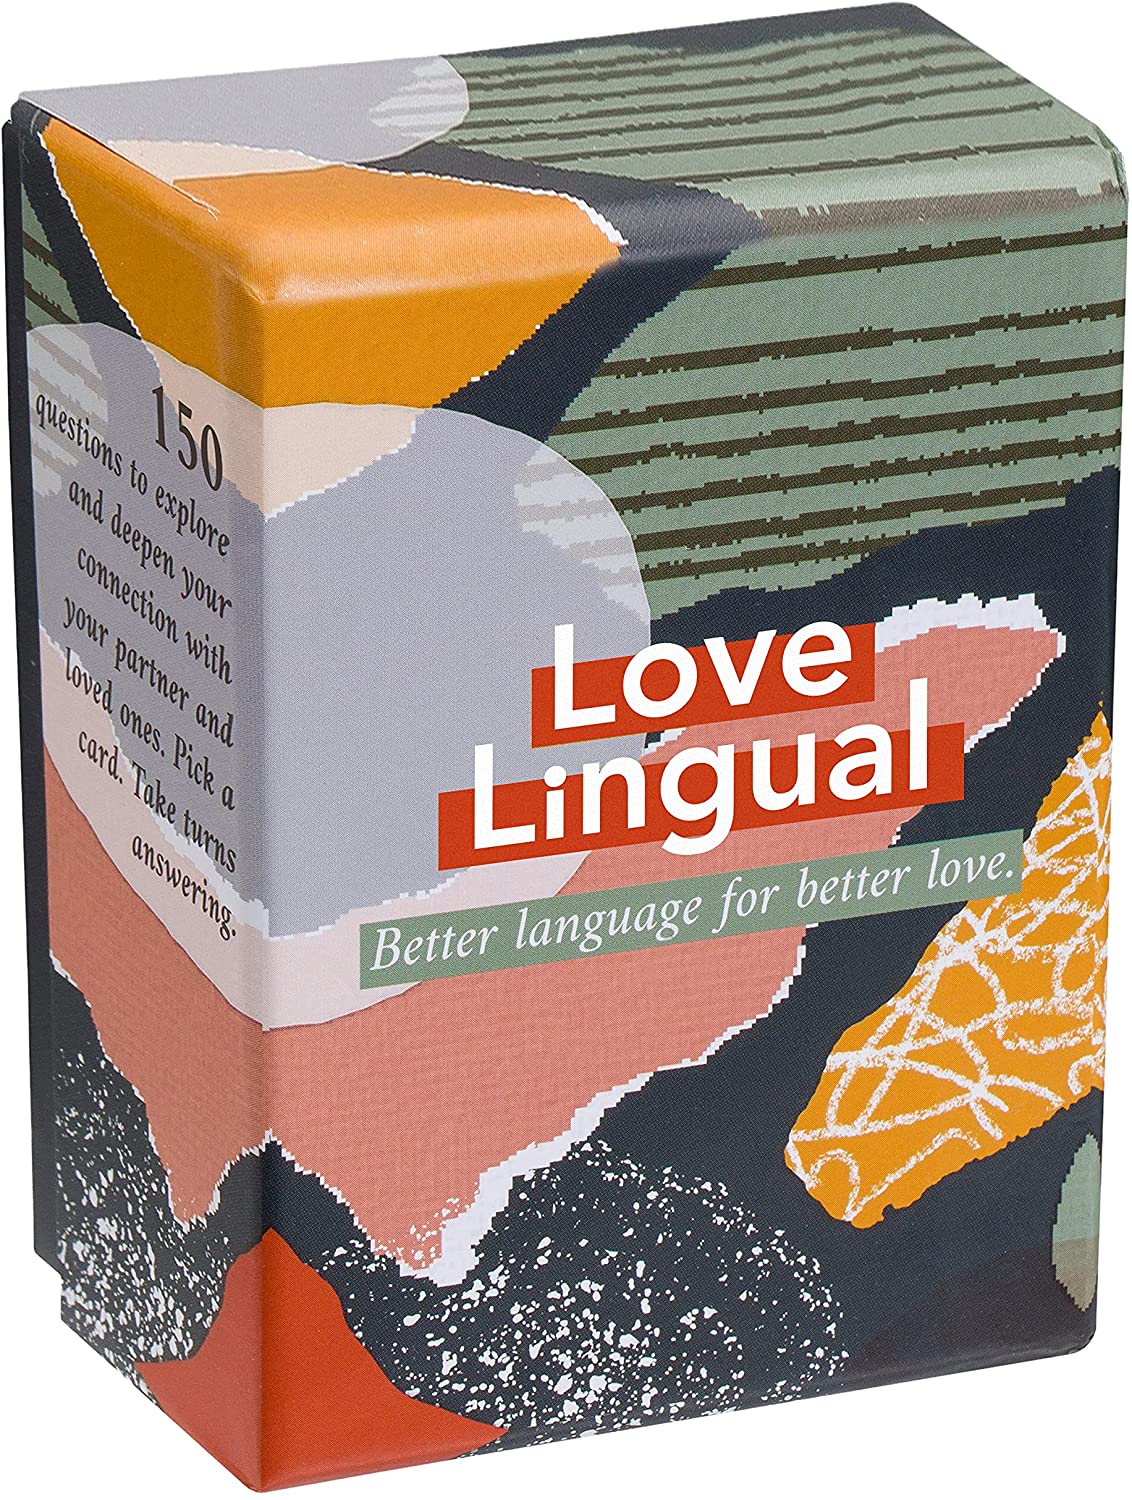 Love Lingual- Card Game - Better Language for Better Love